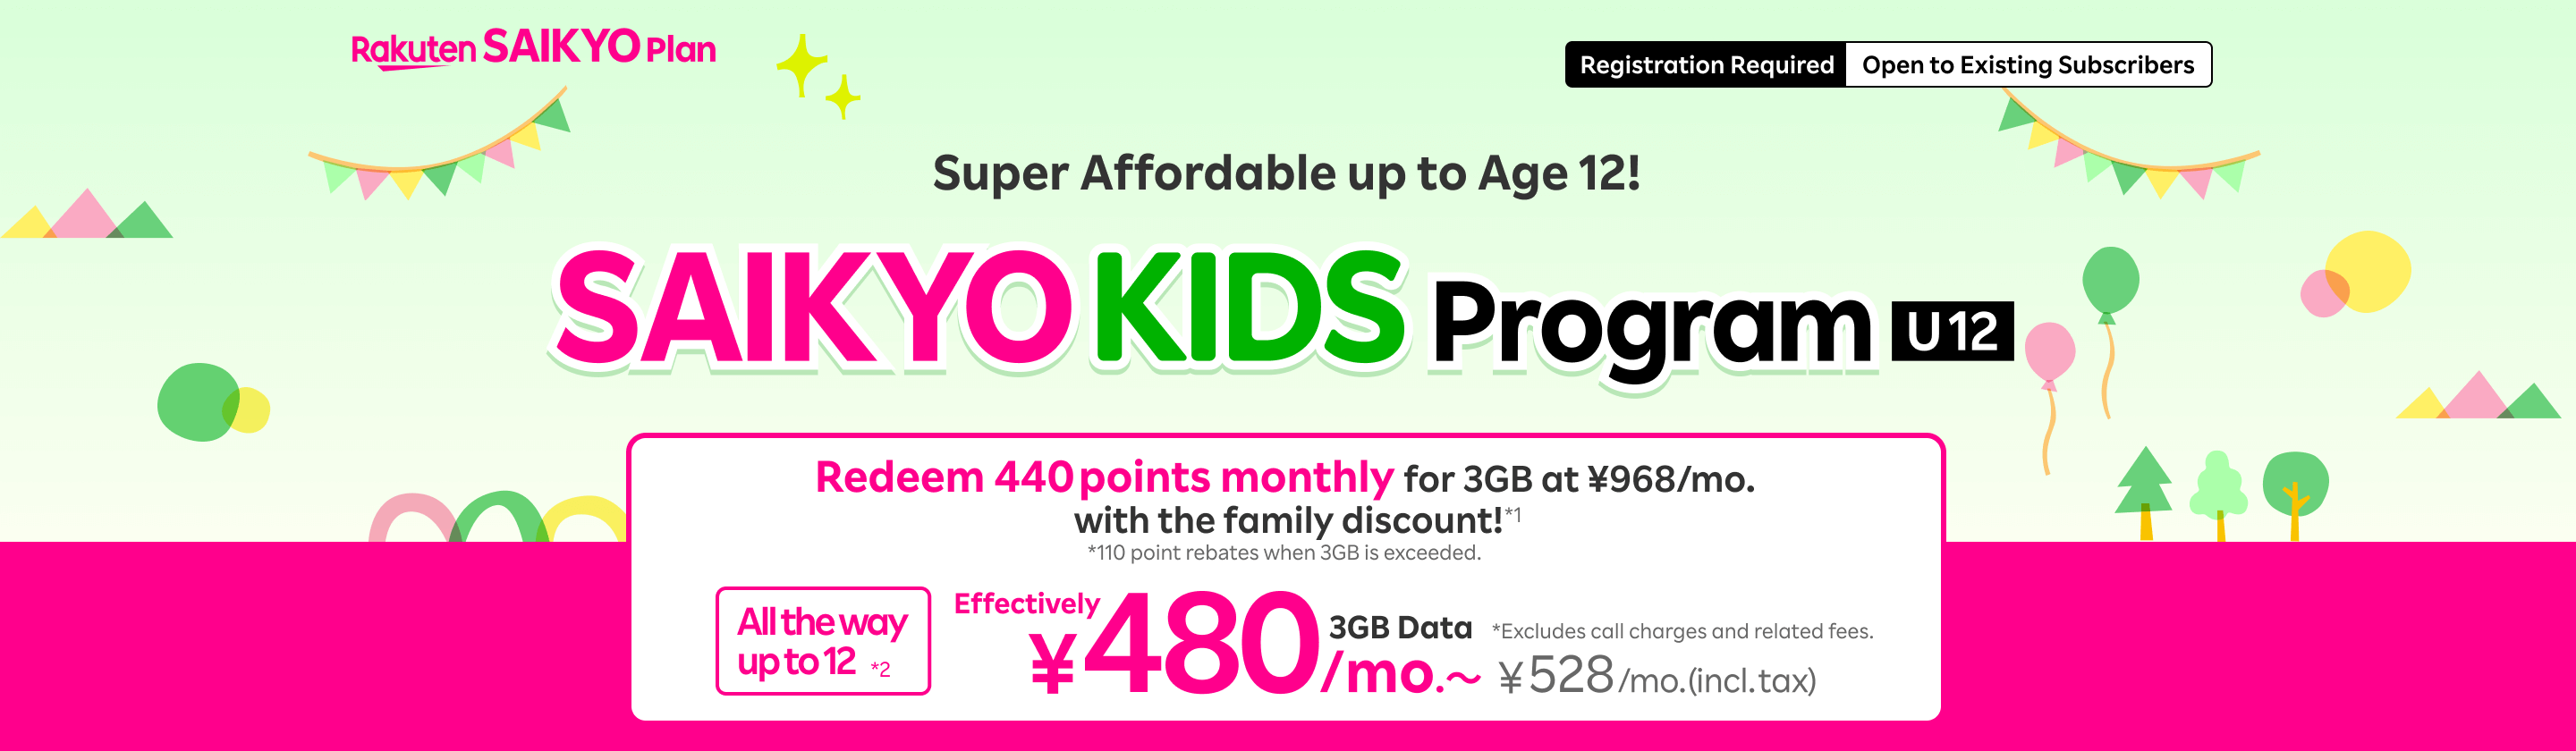 SAIKYO KIDS Program! Super Affordable up to Age 12! Get 3GB for effectively 480 yen (528 yen incl. tax) after family discount and point rebates. 